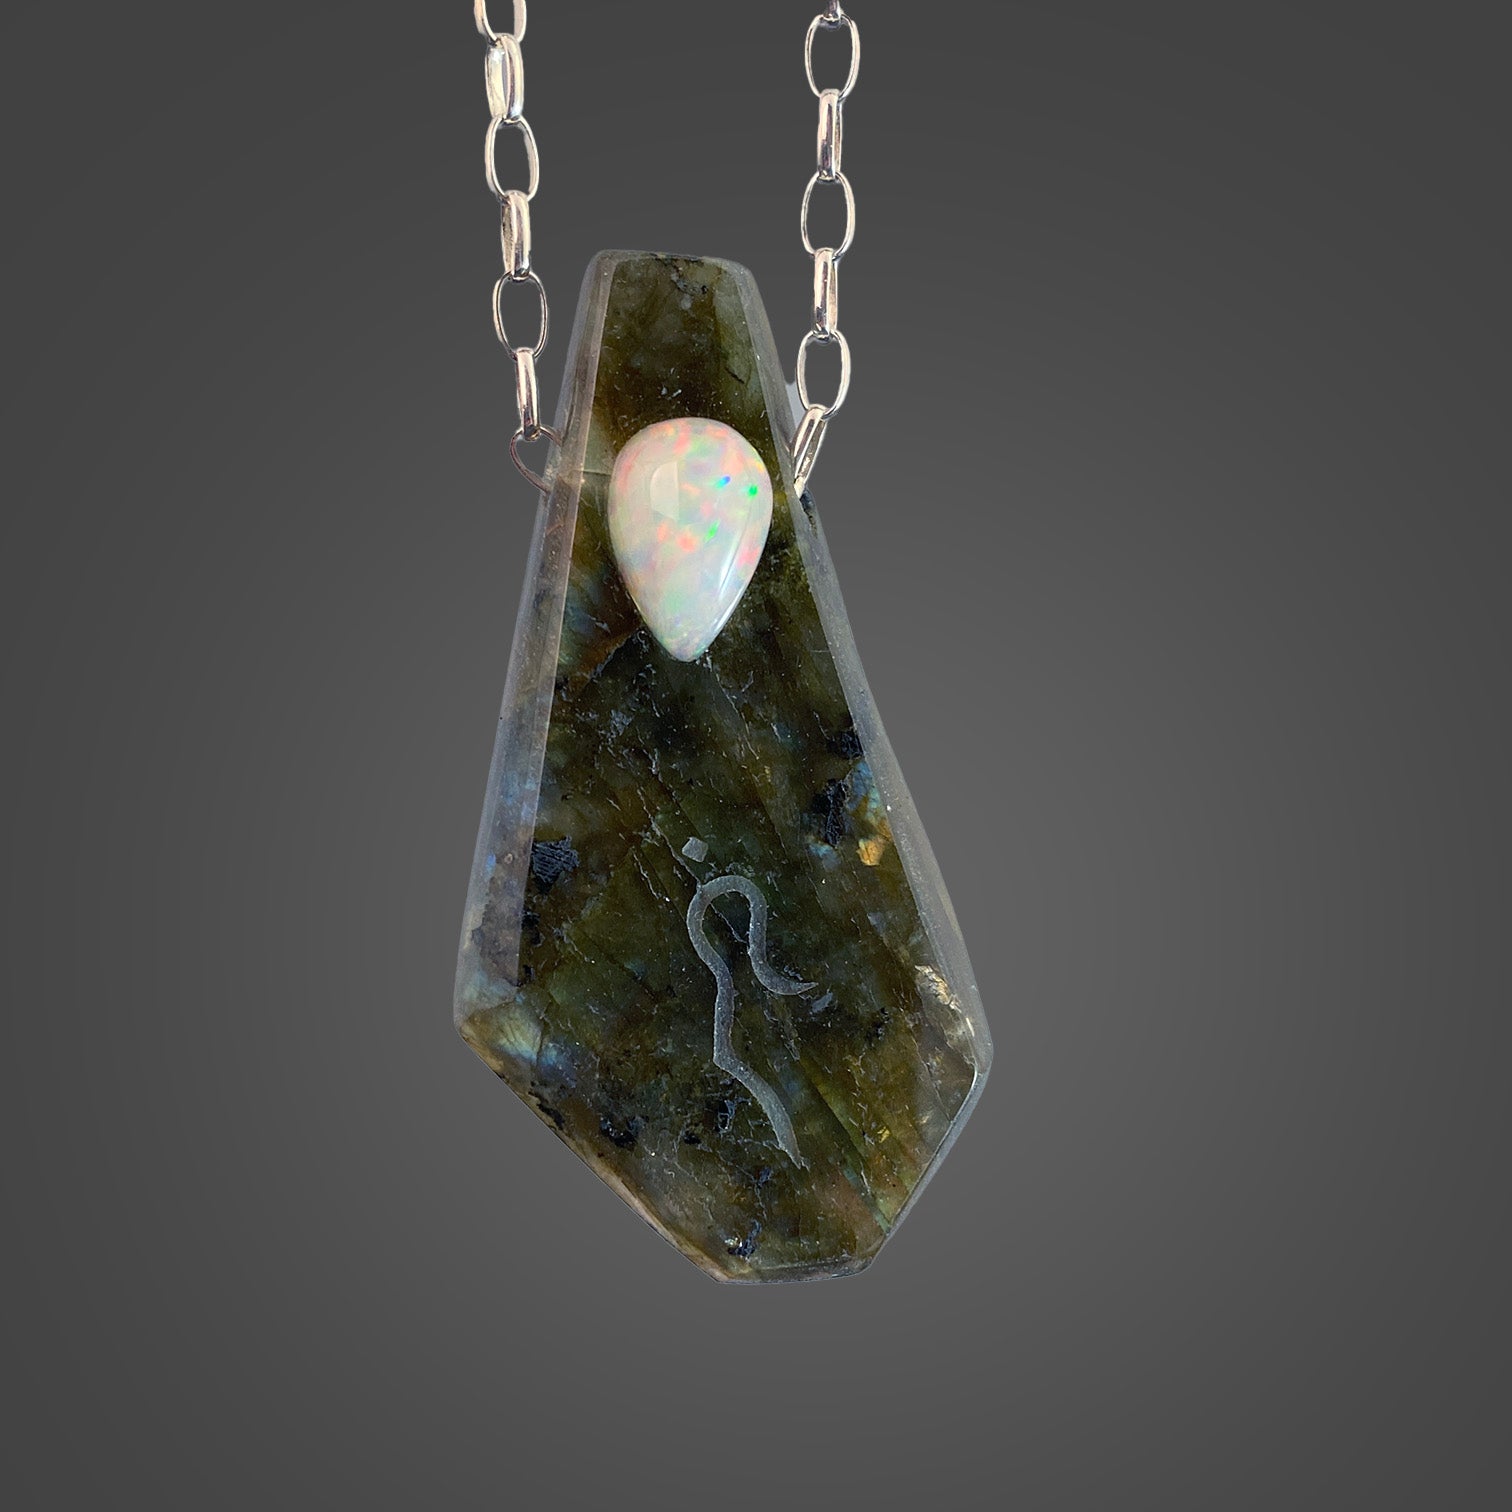 Labradorite Pendant with Ethiopian Opal Accent and Divine Feminine and Sacred Masculine Symbols